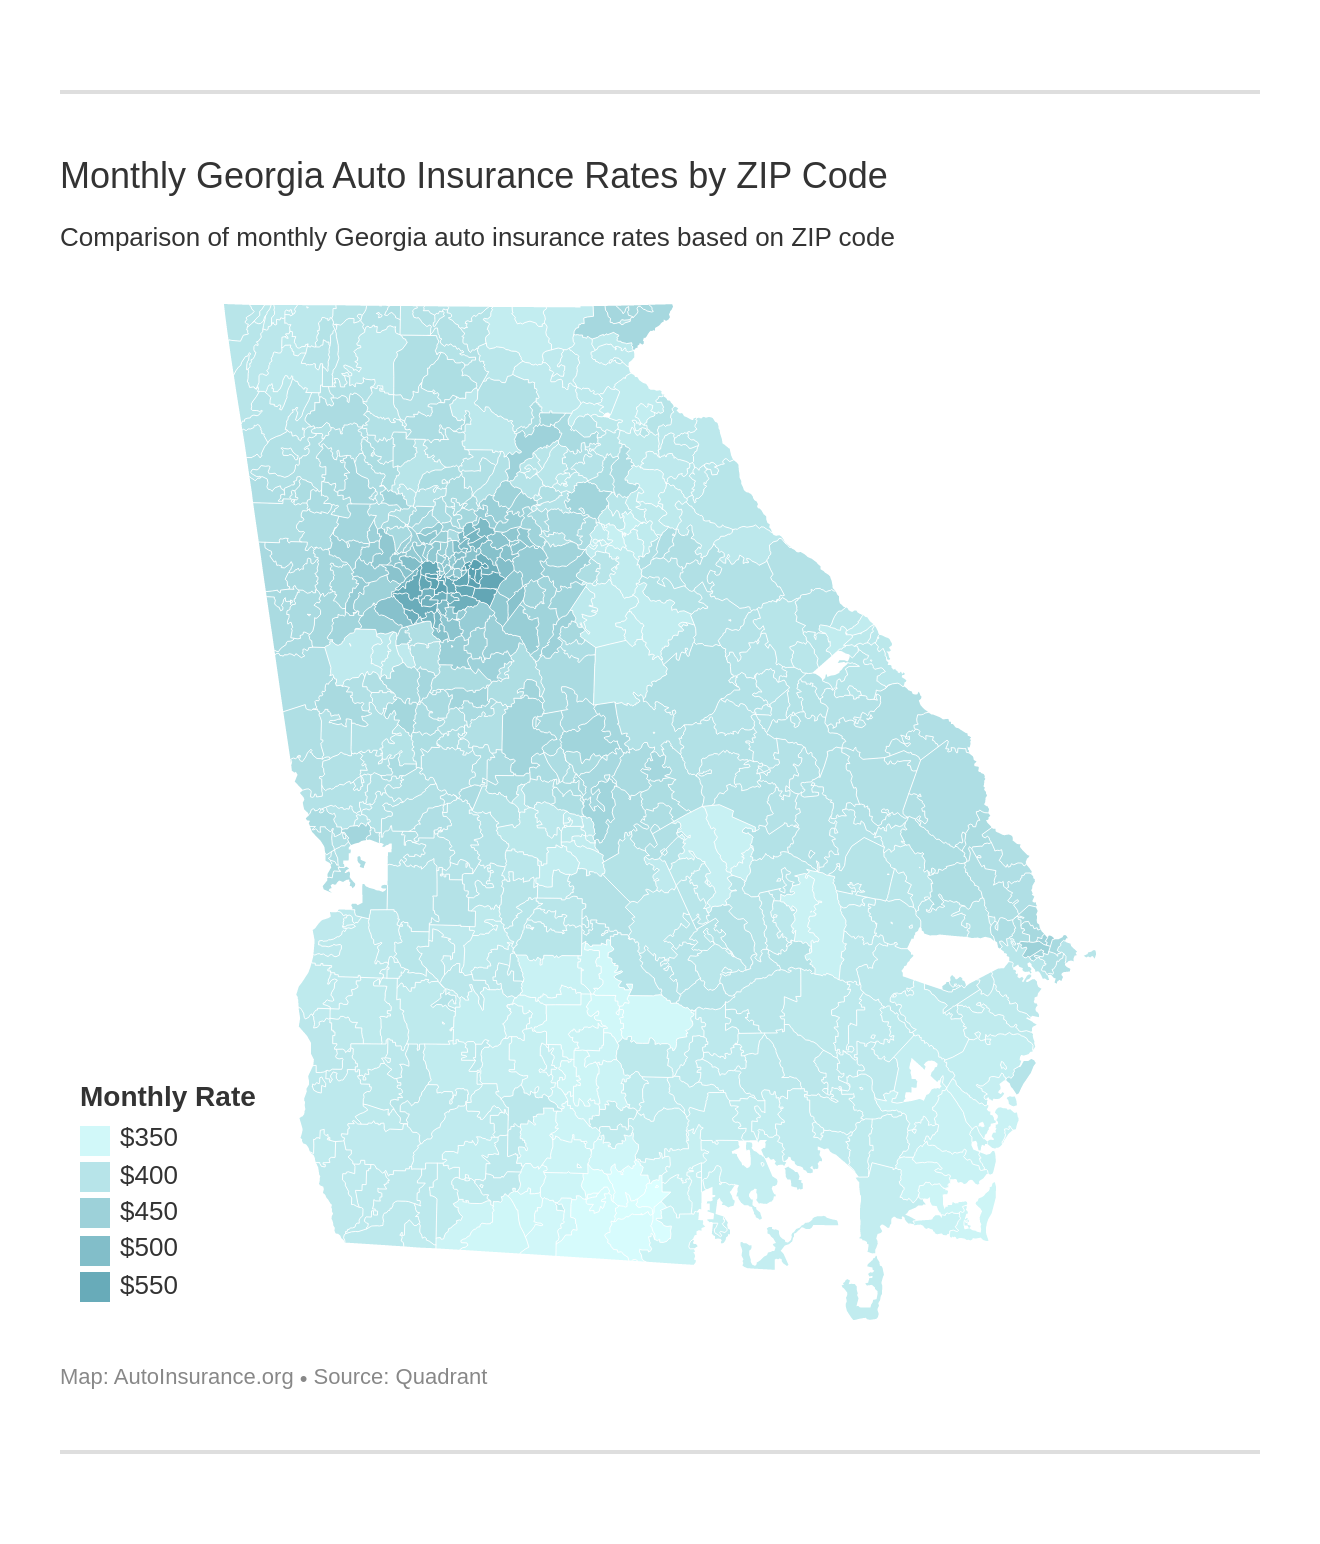 Monthly Georgia Auto Insurance Rates by ZIP Code